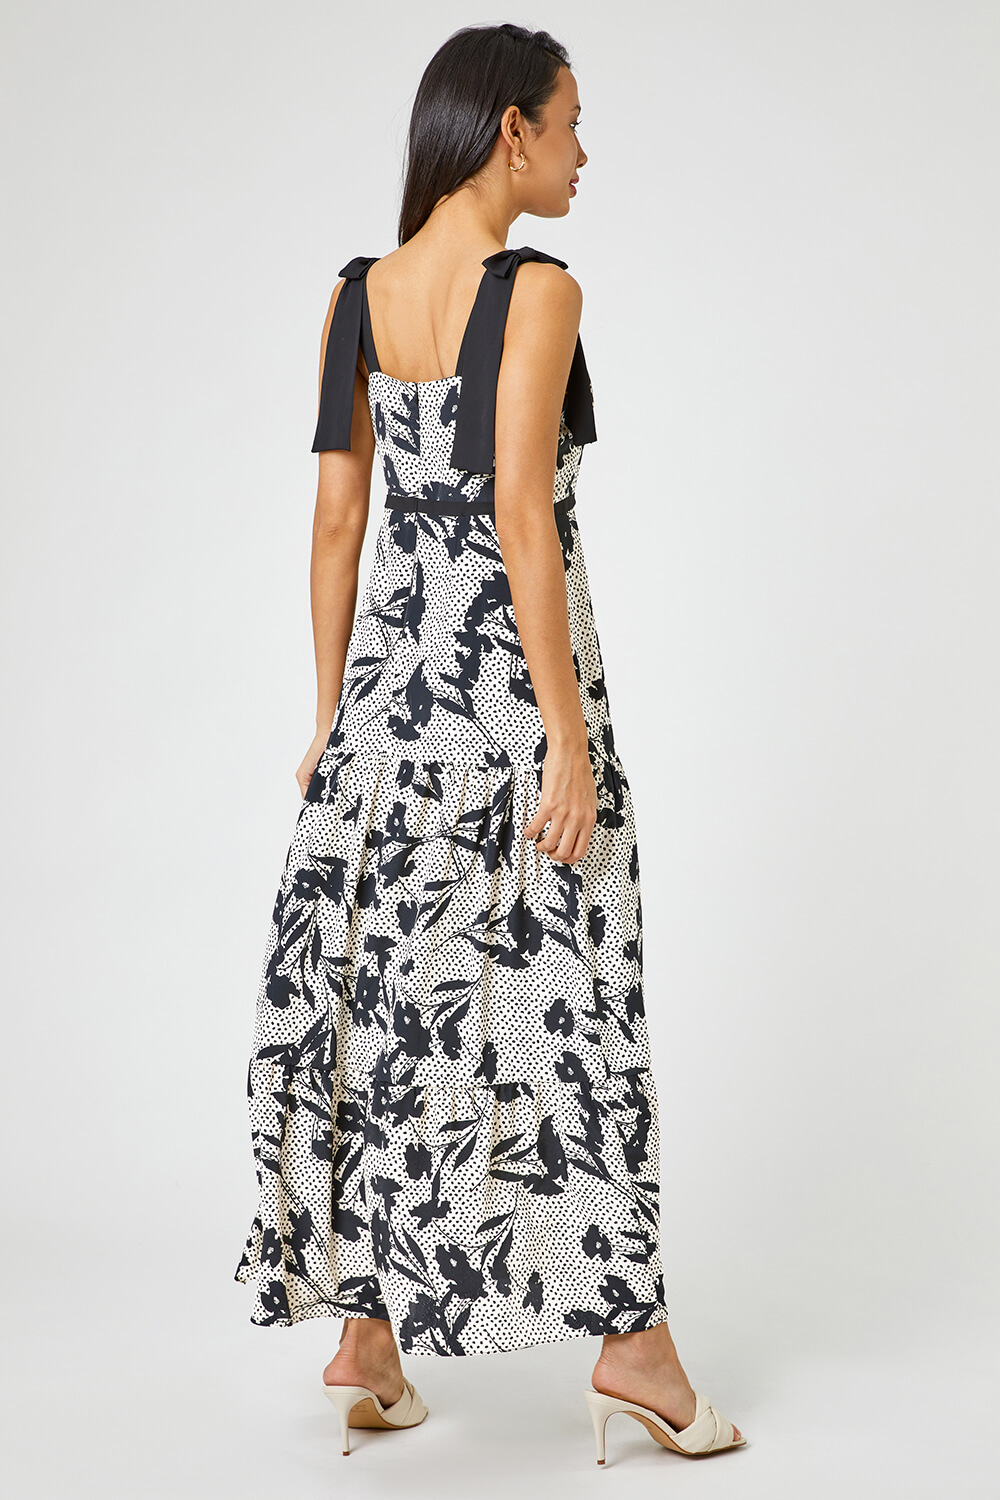 Cream  Tiered Contrast Spot Floral Print Maxi Dress, Image 3 of 5